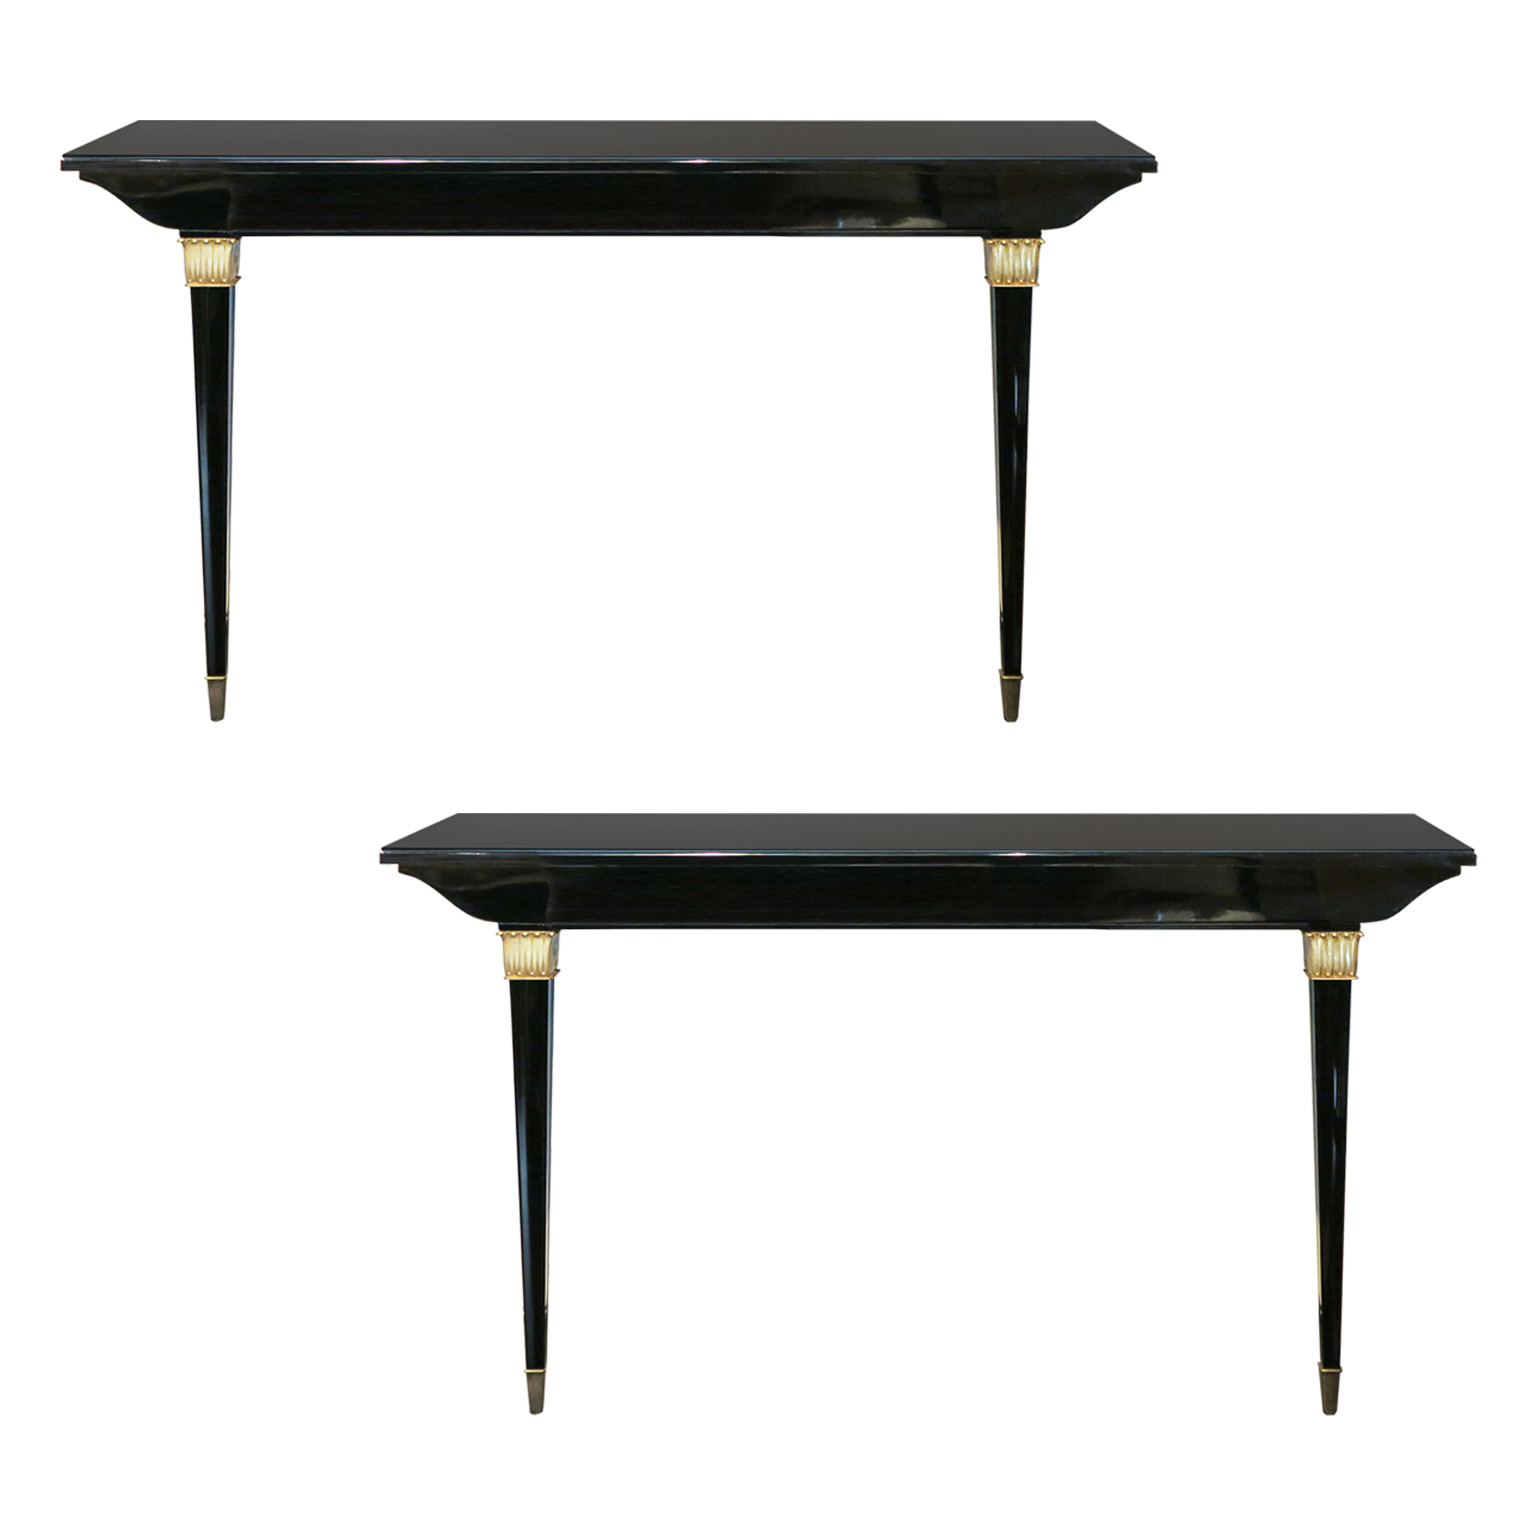 Pair of French Art Deco Black Lacquer wall consoles.